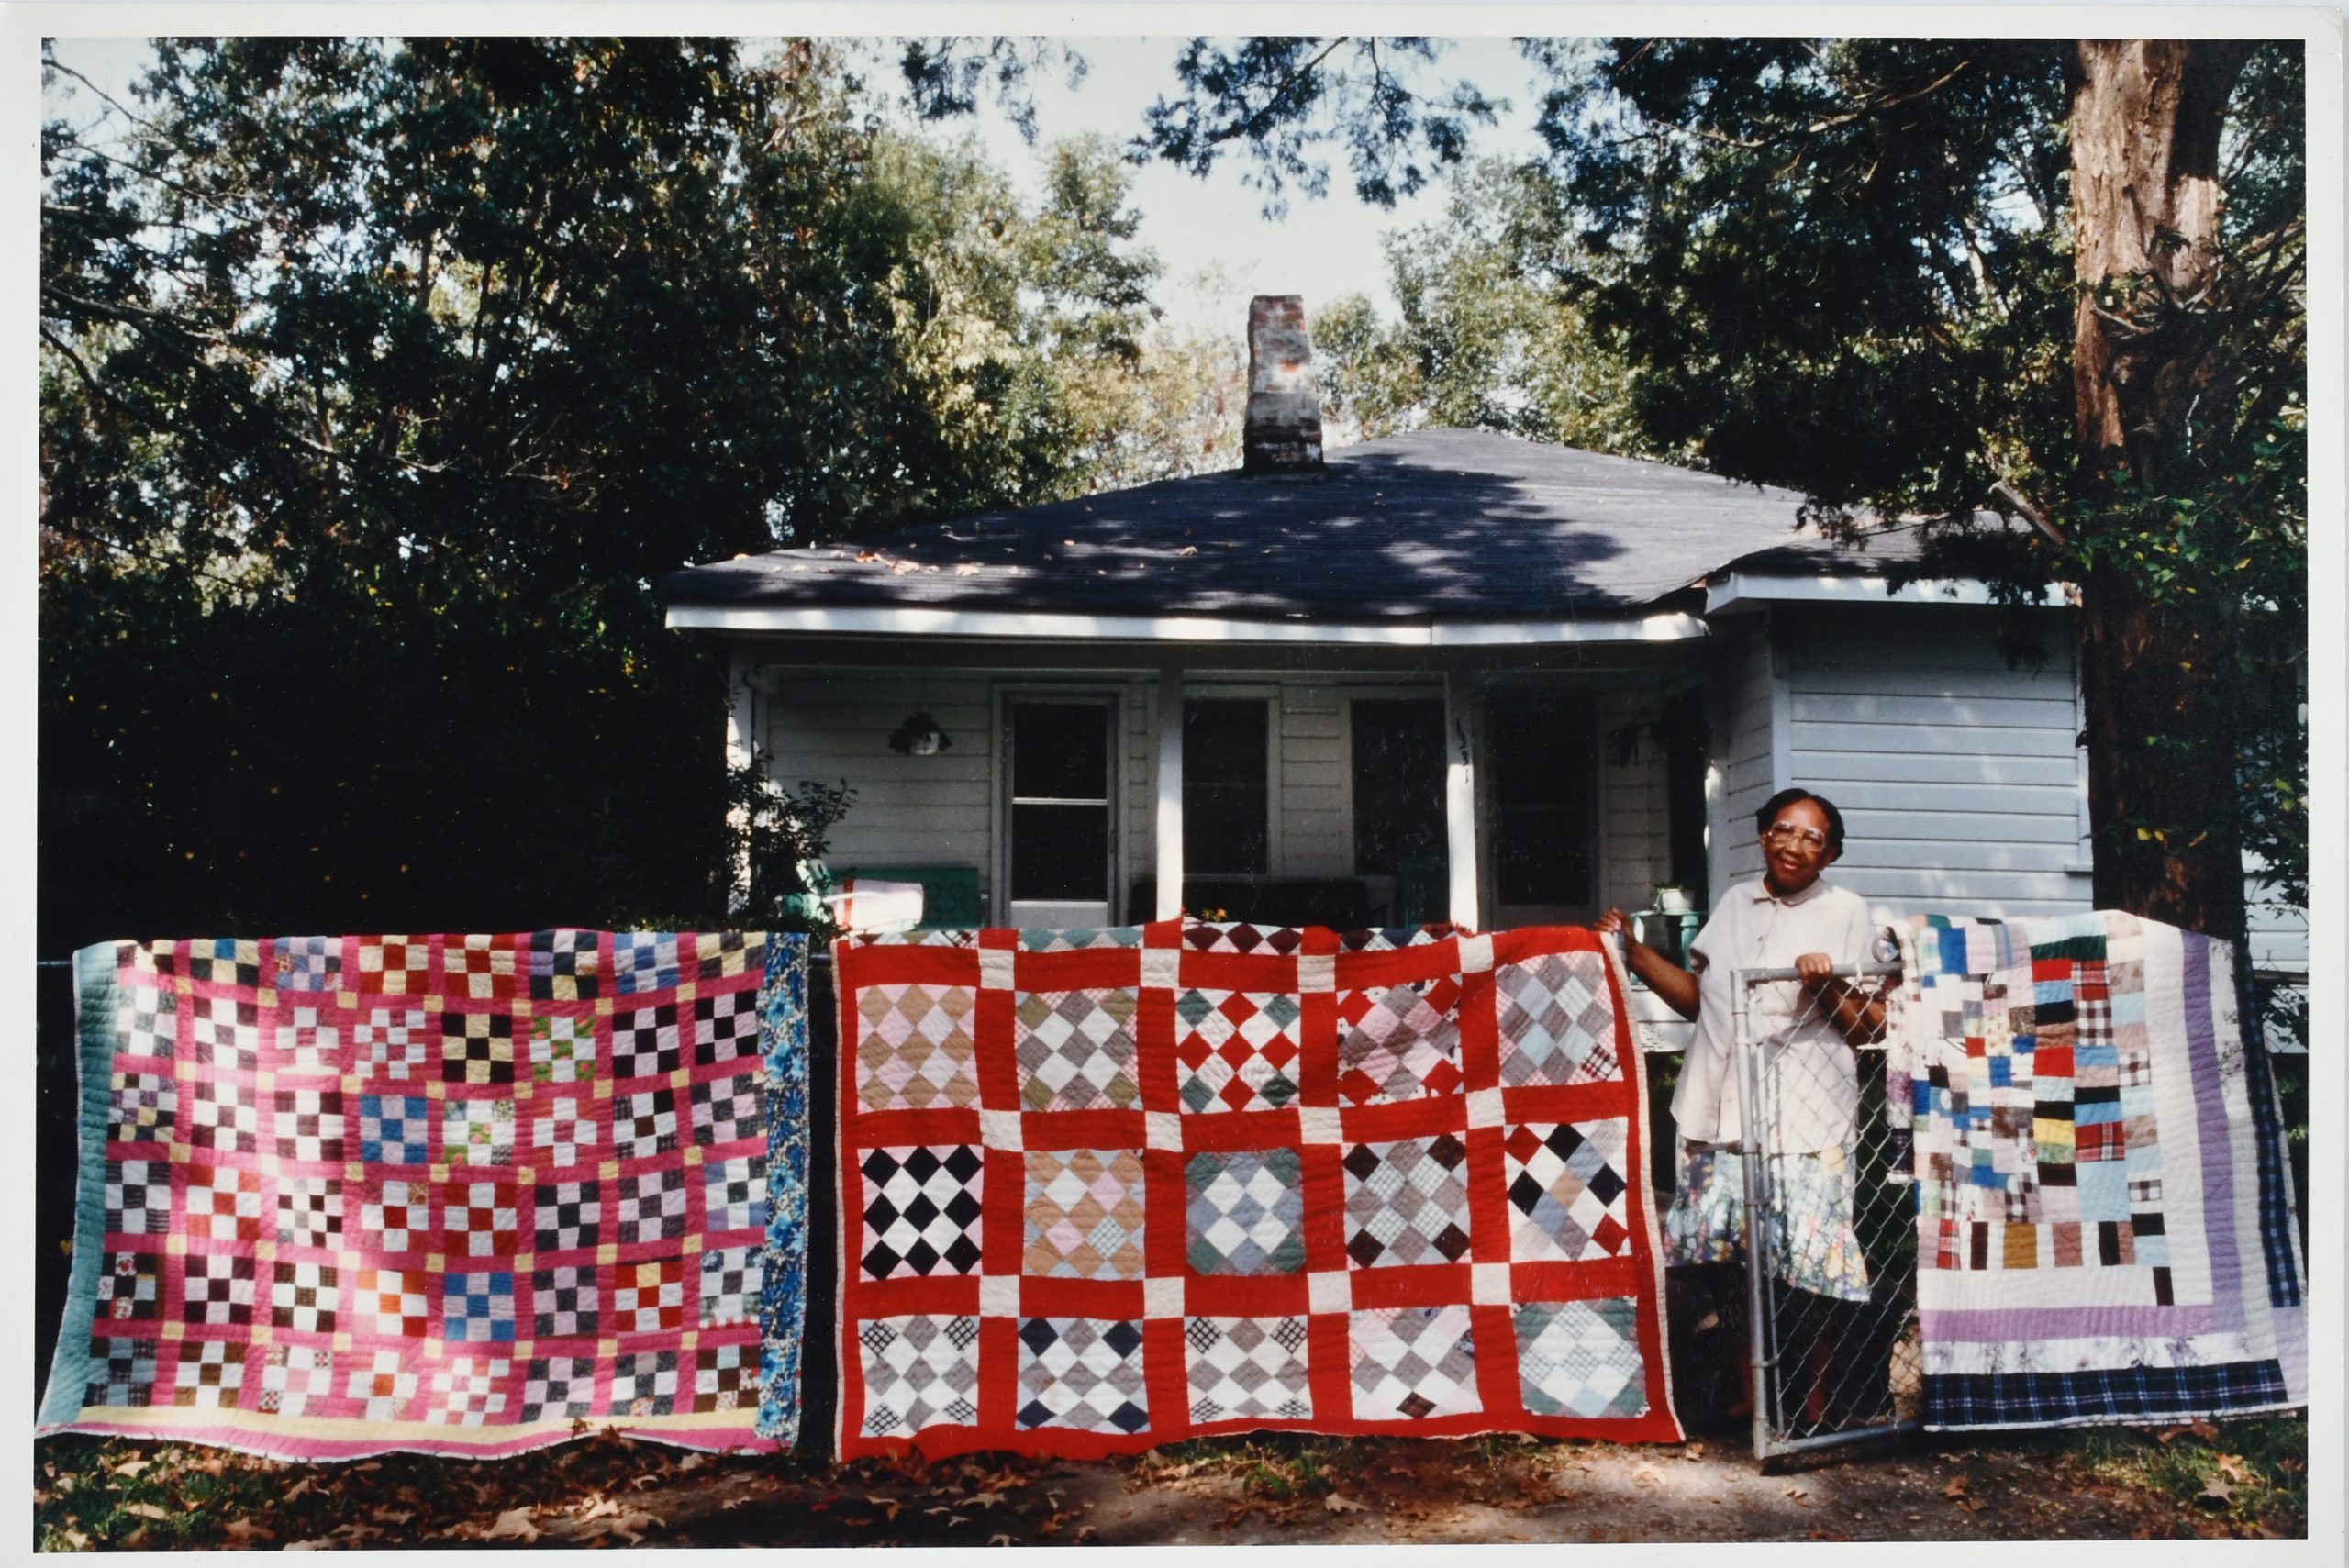 Color archival photograph from the Roland L. Freeman collection in Wilson Library. The photograph shows a black woman standing behind a wire fence in front of a house. There are 3 large quilts hanging on the fence.(191 (2) Roland L. Freeman. Florence Barnes. Wilkinson County, Mississippi, October 1992.)